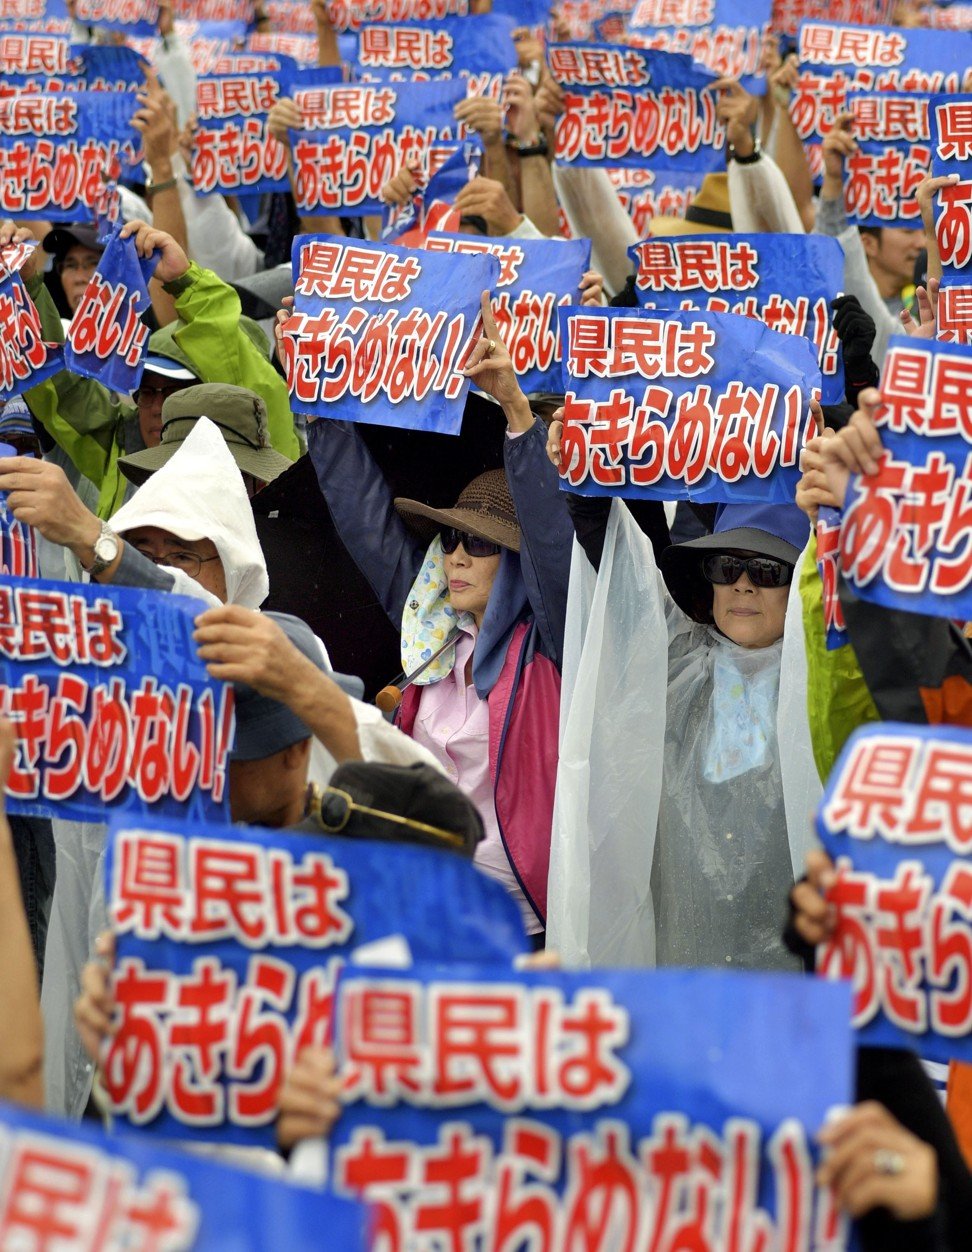 Okinawa residents hope the US base will be moved outside the prefecture due to accidents and crimes involving US military personnel. Photo: Kyodo